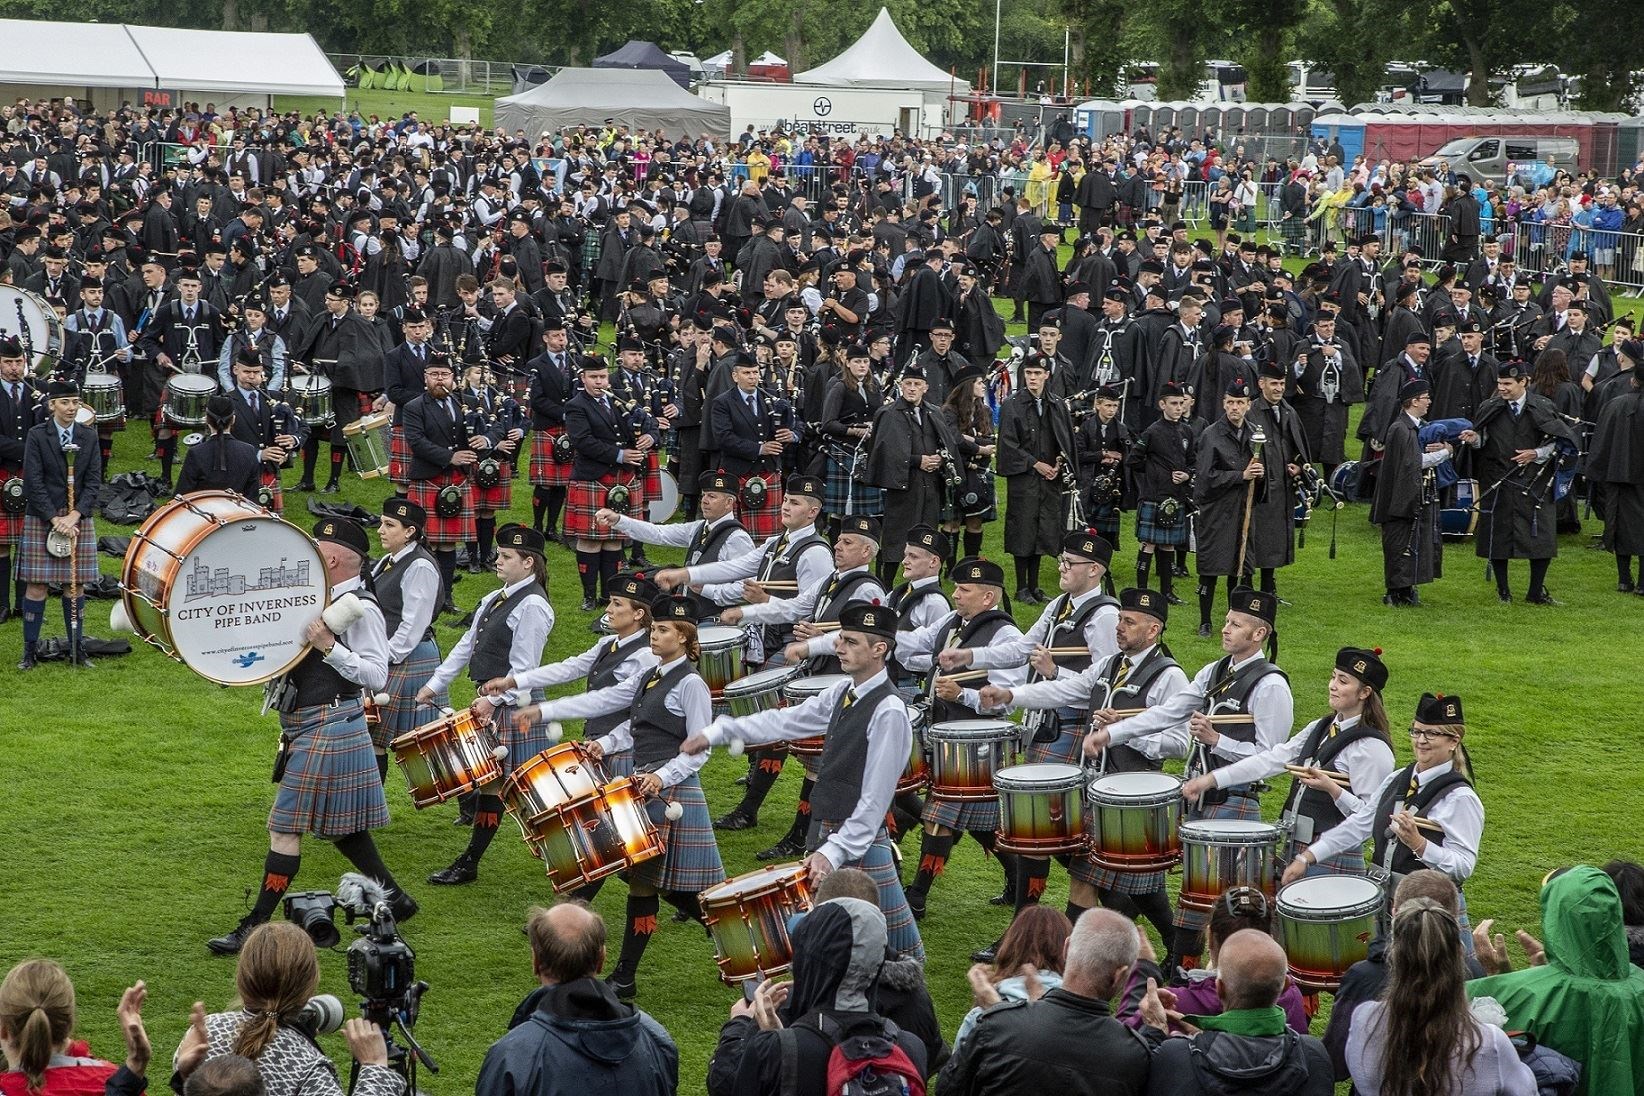 City of Inverness Pipe Band competing at Piping Live in 2019.